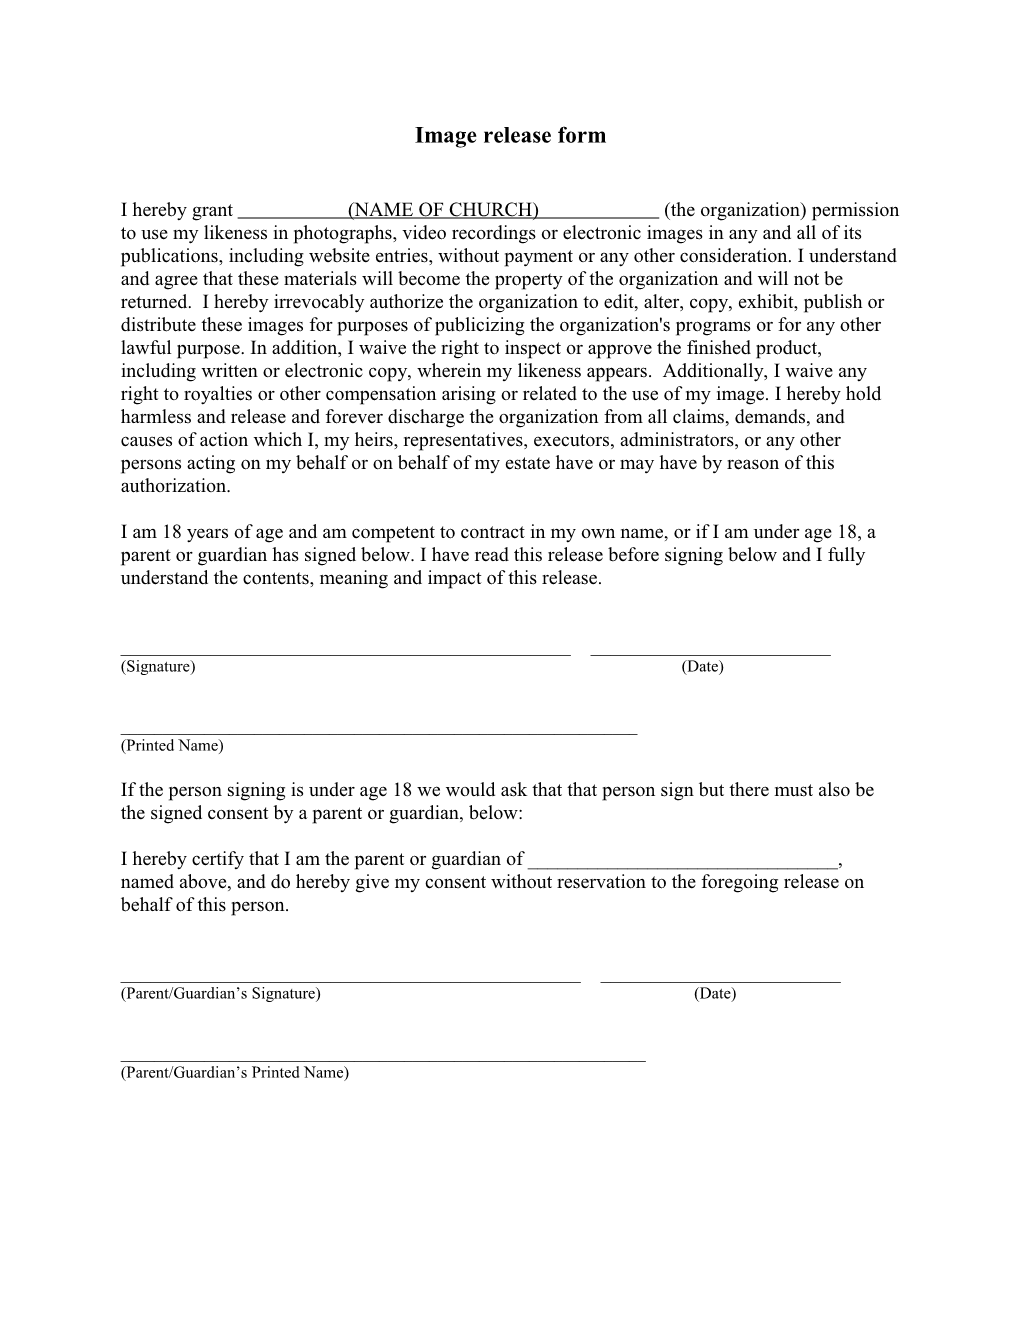 Image Release Form